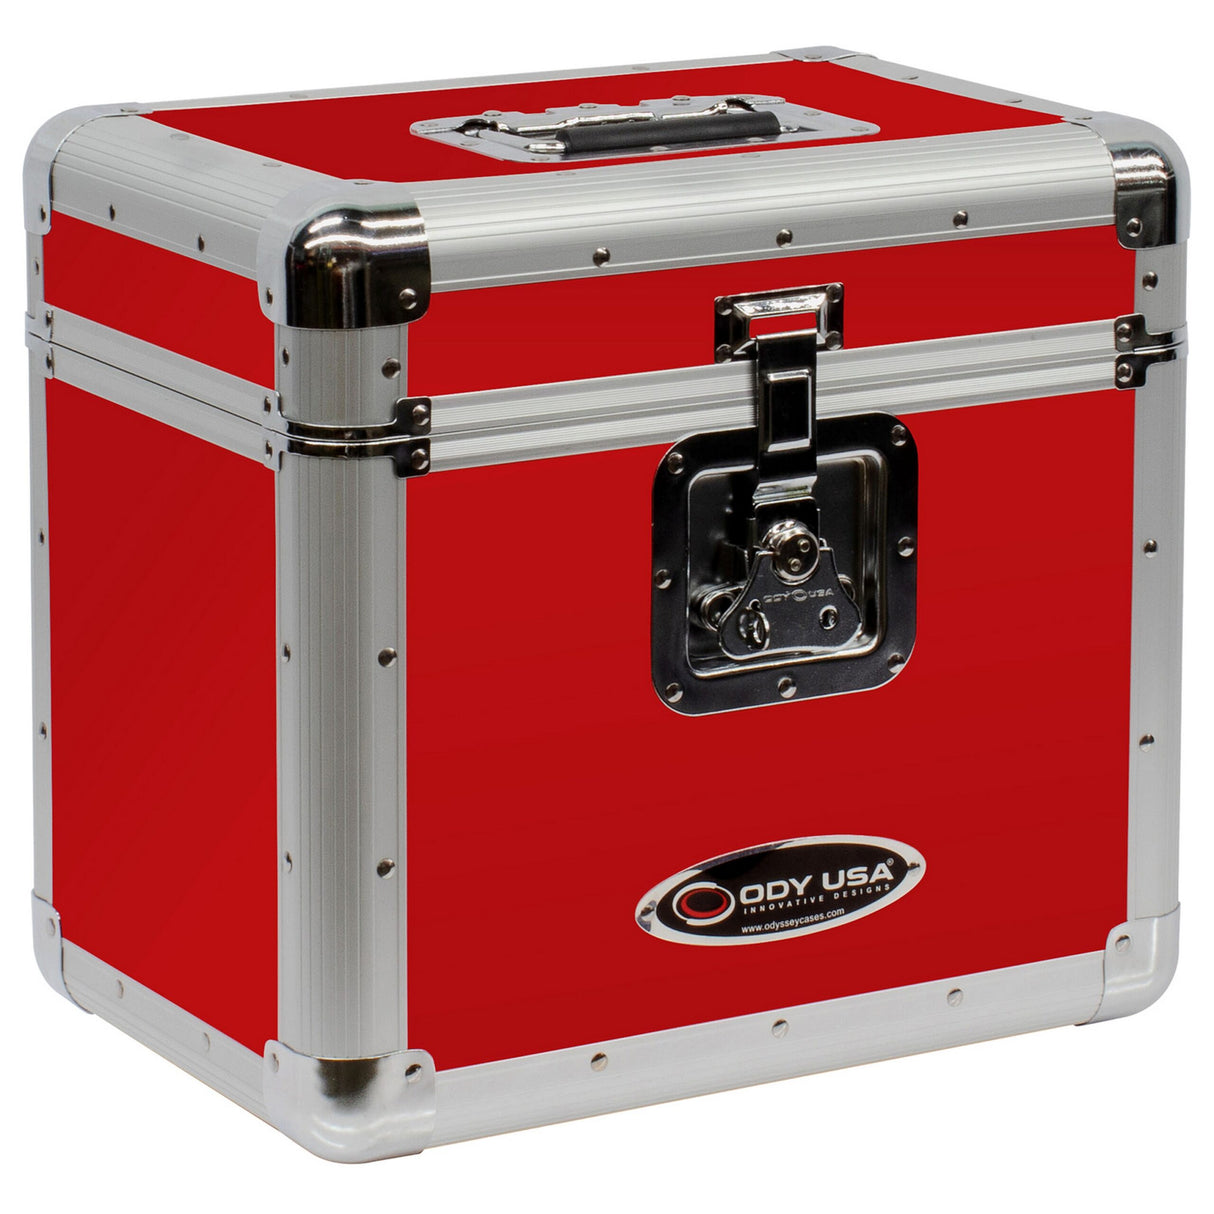 Odyssey KLP2RED KROM Series Stackable Record/Utility Case for 12-Inch Vinyl Records/LPs, Red